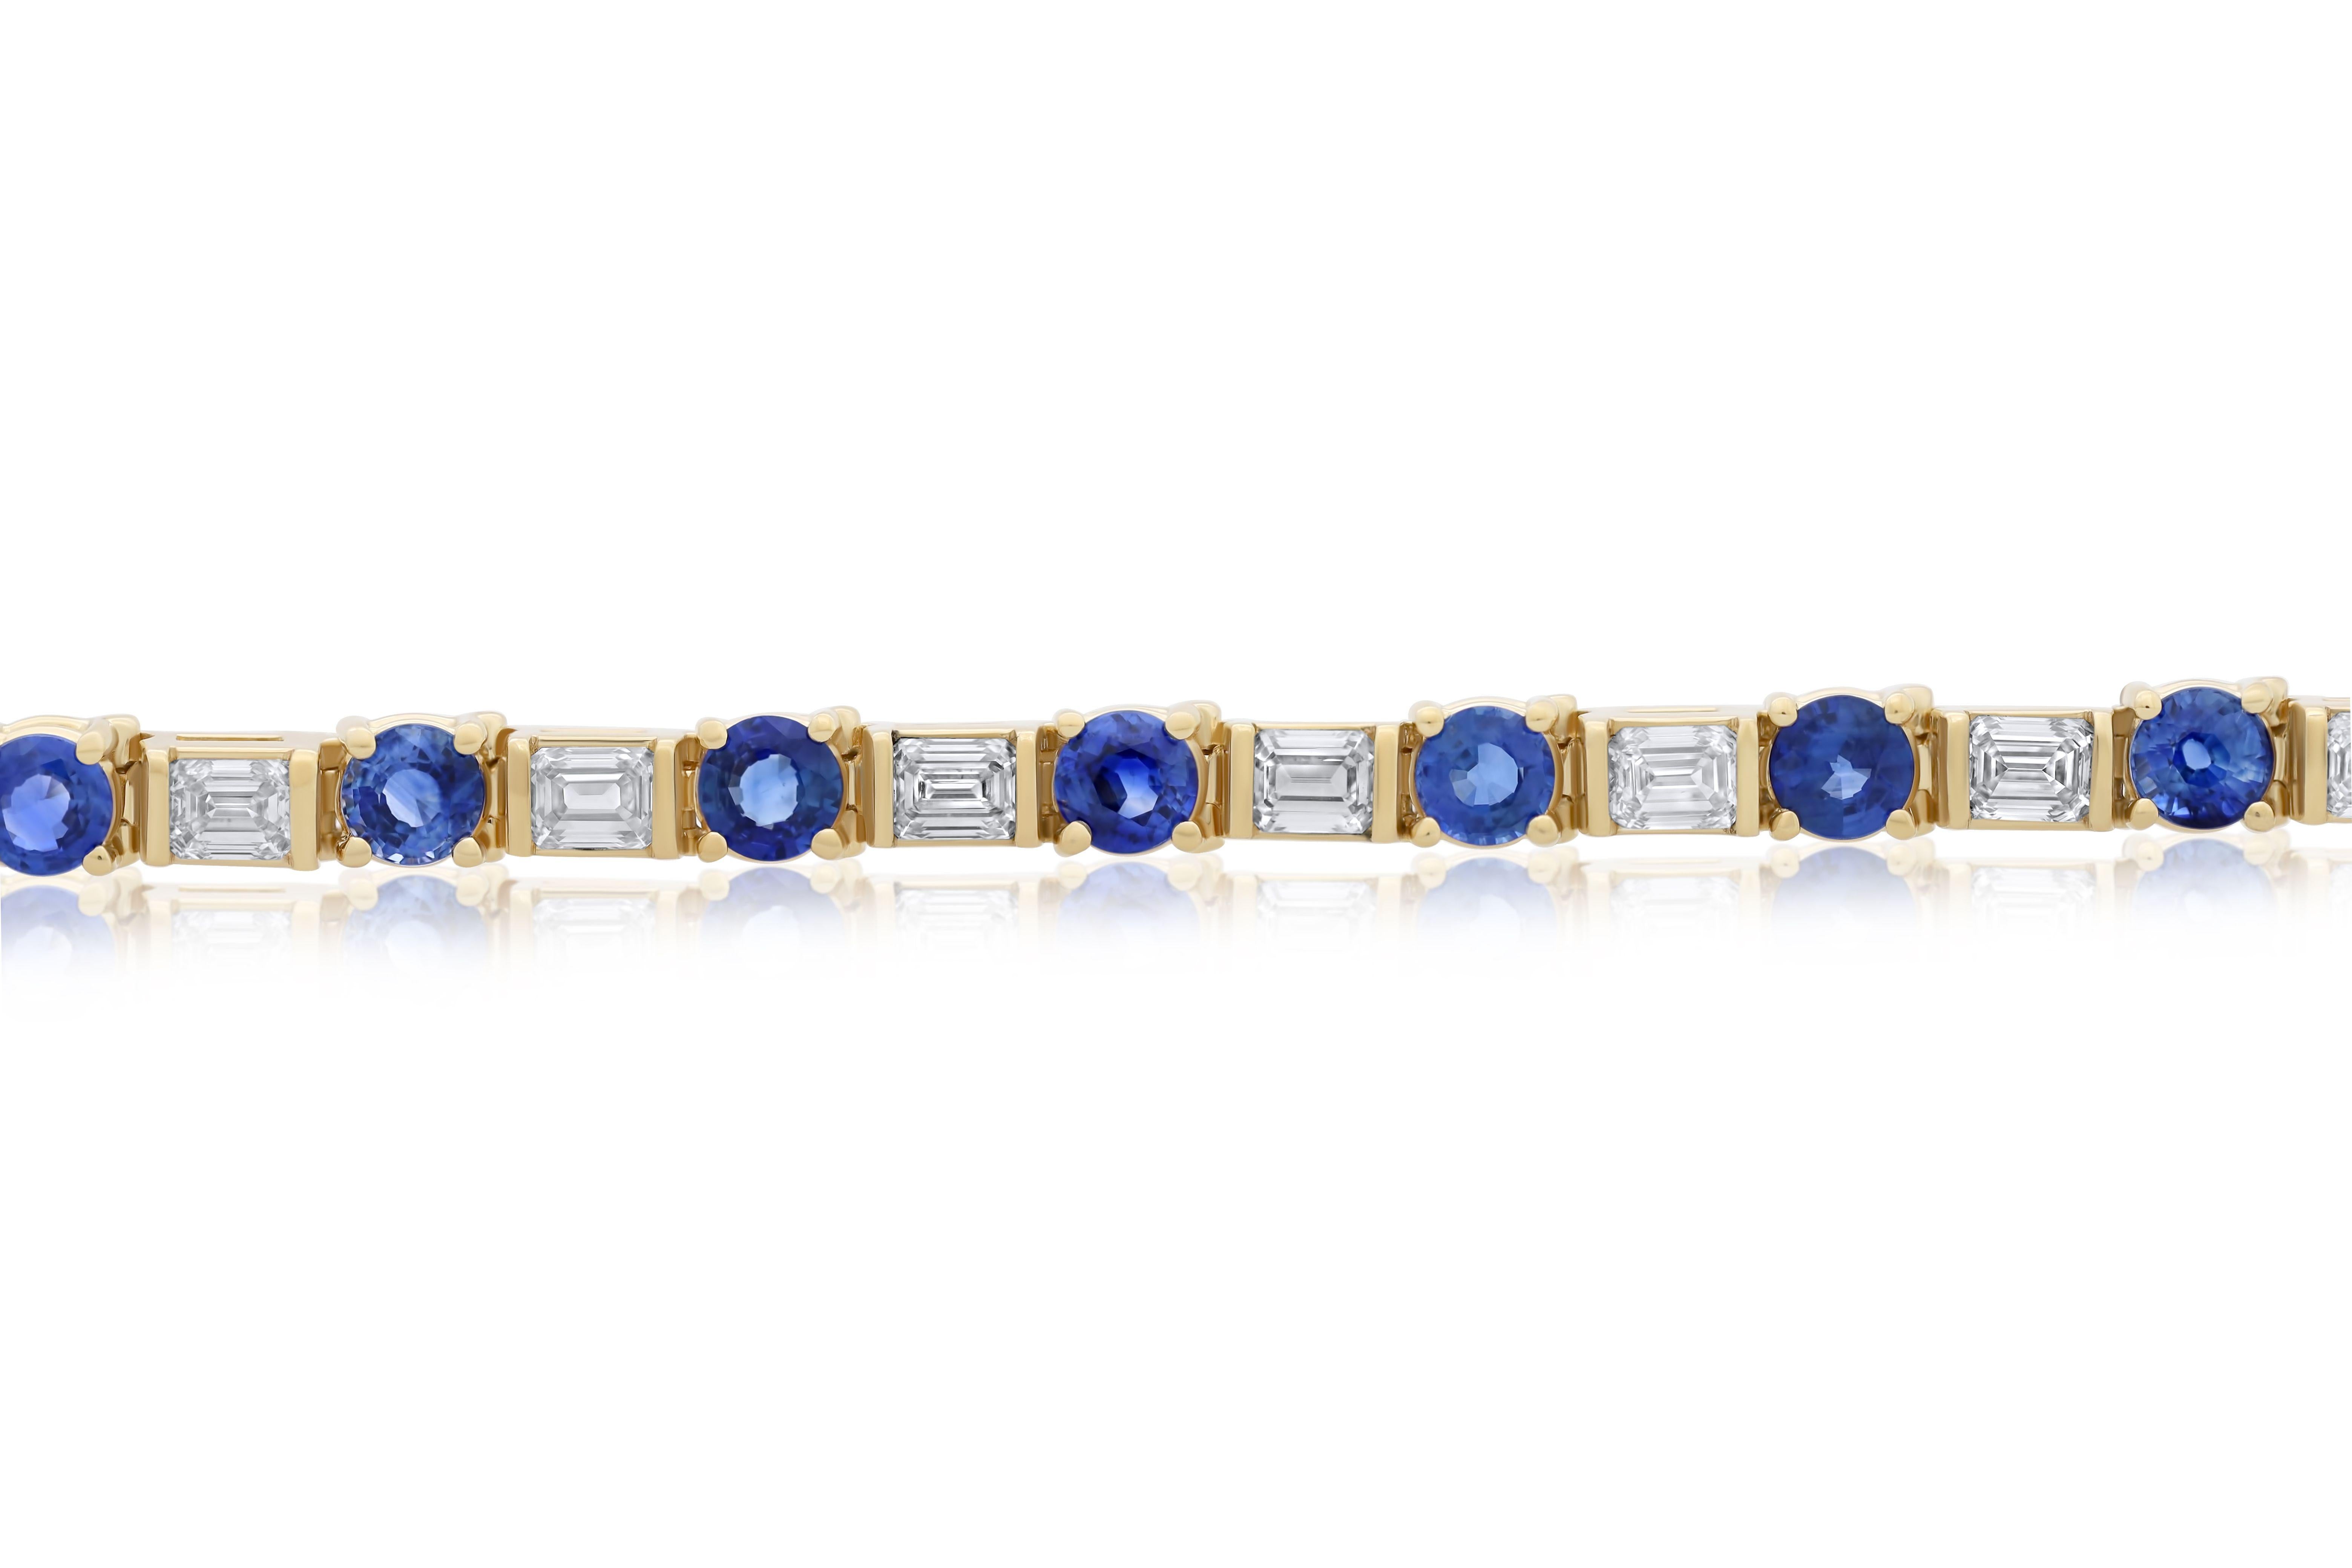 18 kt yellow gold sapphire and diamond eternity bracelet adorned with 9.05 cts tw of round sapphires separated by 6.05 cts tw of baguette cut diamonds